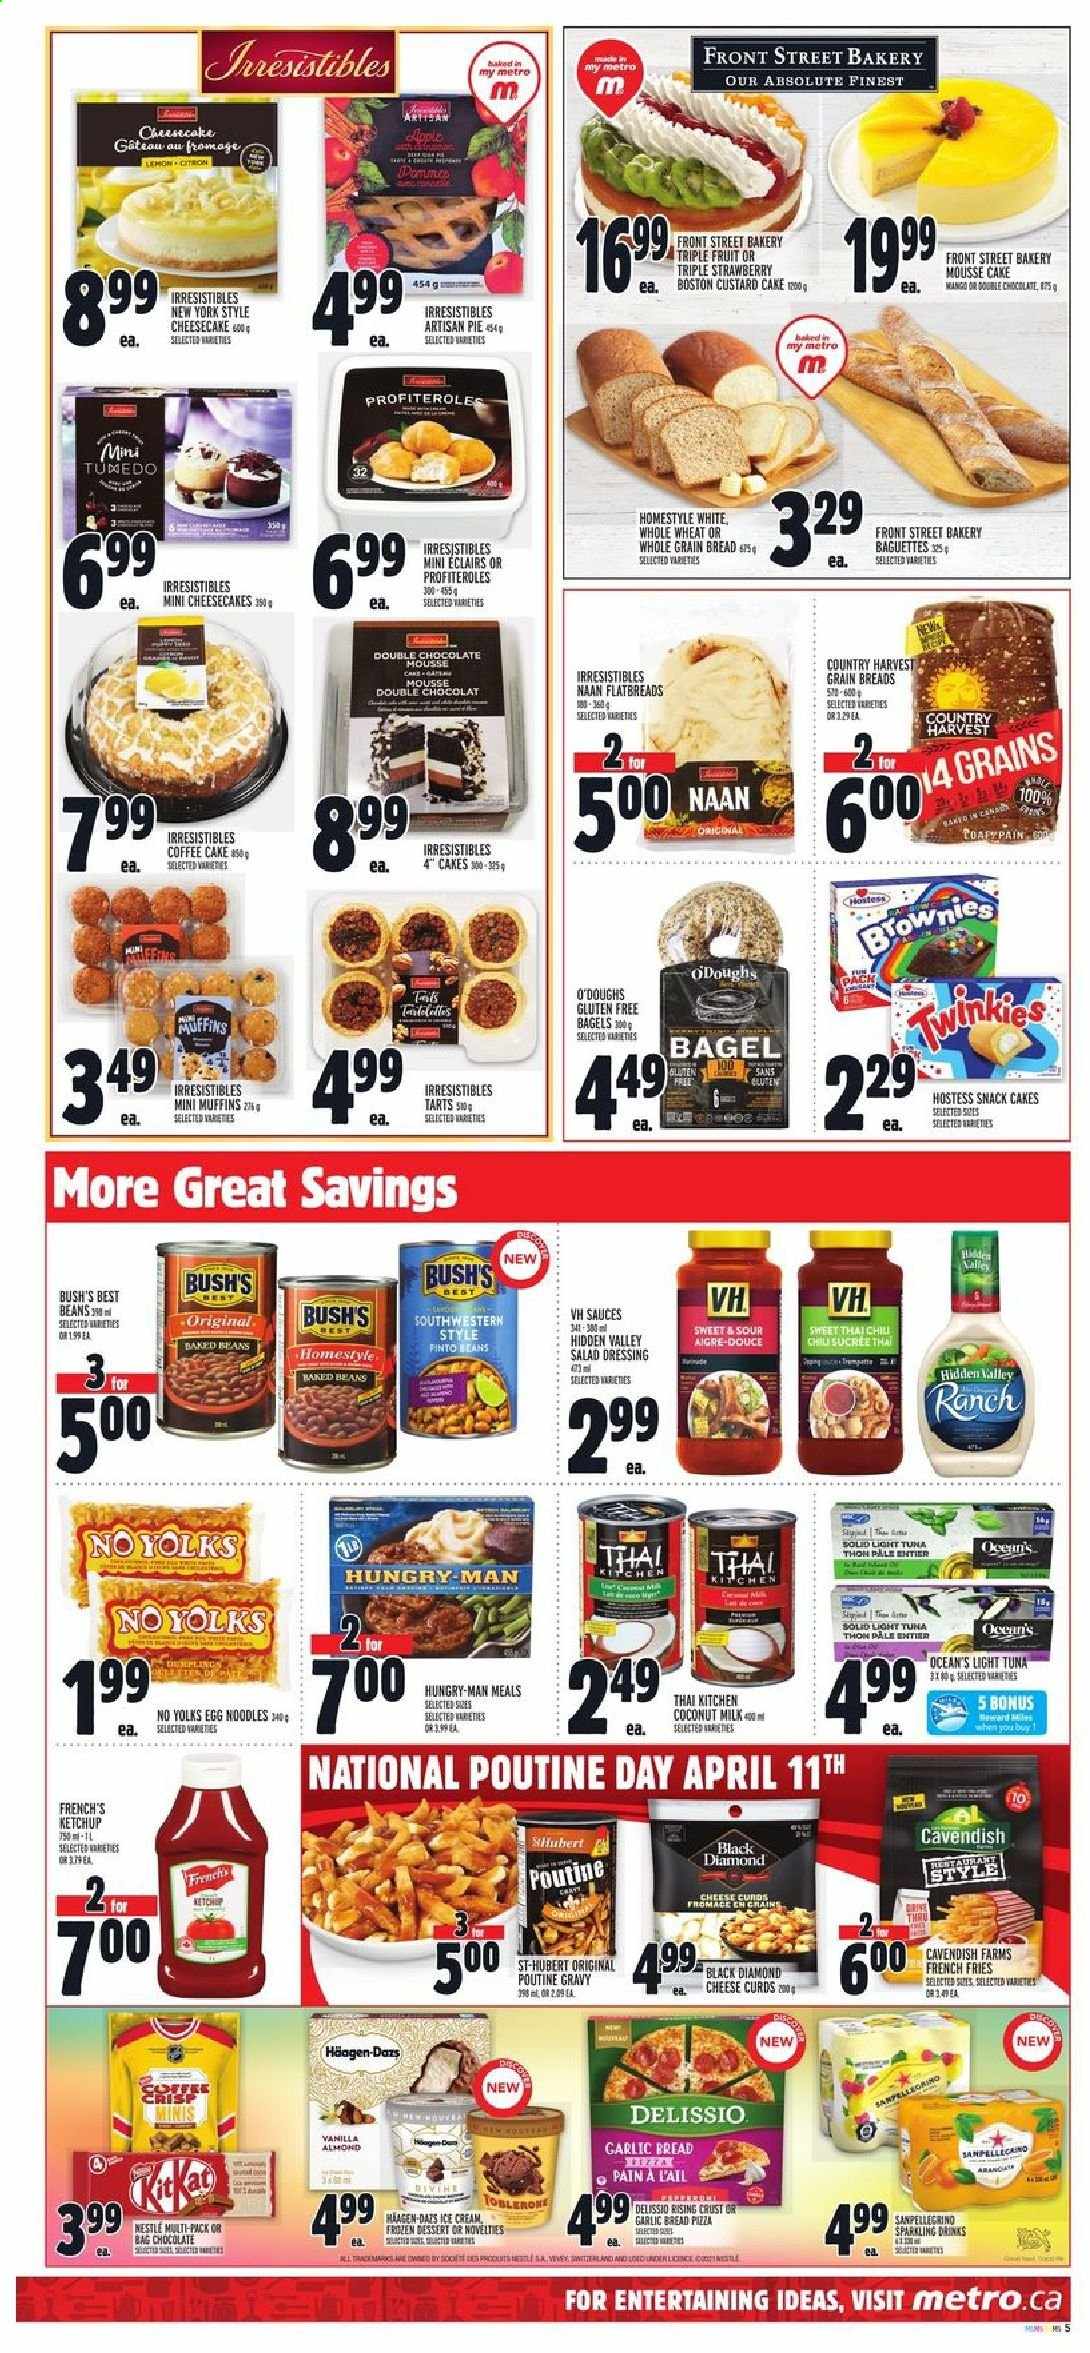 thumbnail - Metro Flyer - April 08, 2021 - April 14, 2021 - Sales products - bagels, bread, cake, pie, brownies, muffin, coffee cake, custard cake, mango, tuna, noodles, cheese curd, ice cream, Häagen-Dazs, Country Harvest, potato fries, french fries, snack, Toblerone, coconut milk, pinto beans, light tuna, baked beans, egg noodles, salad dressing, dressing, Absolute, Nestlé. Page 6.